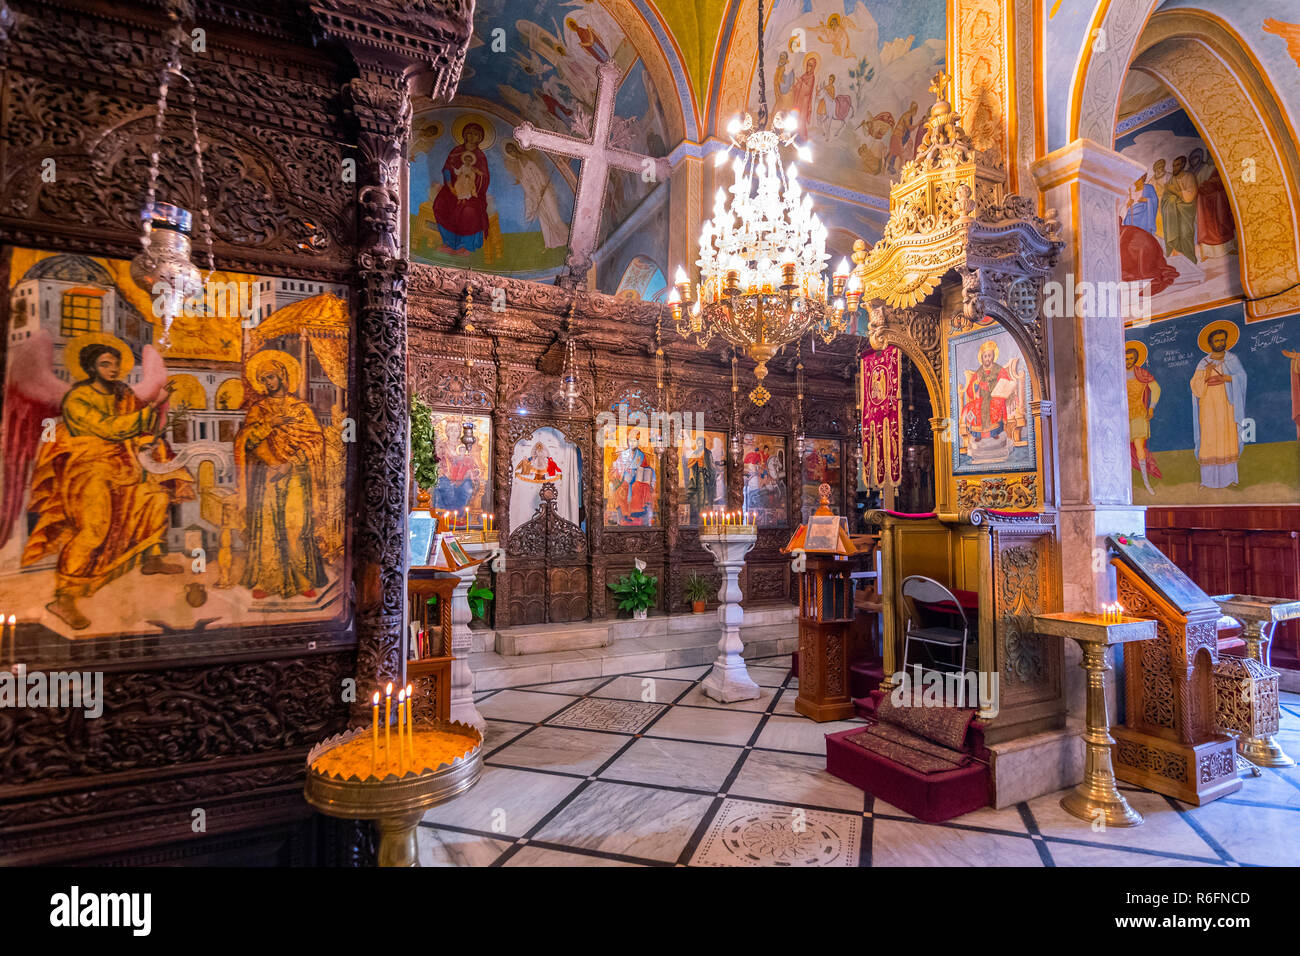 Interior Of The Greek Orthodox Church Of The Annunciation In Nazareth, Israel Stock Photo - Alamy